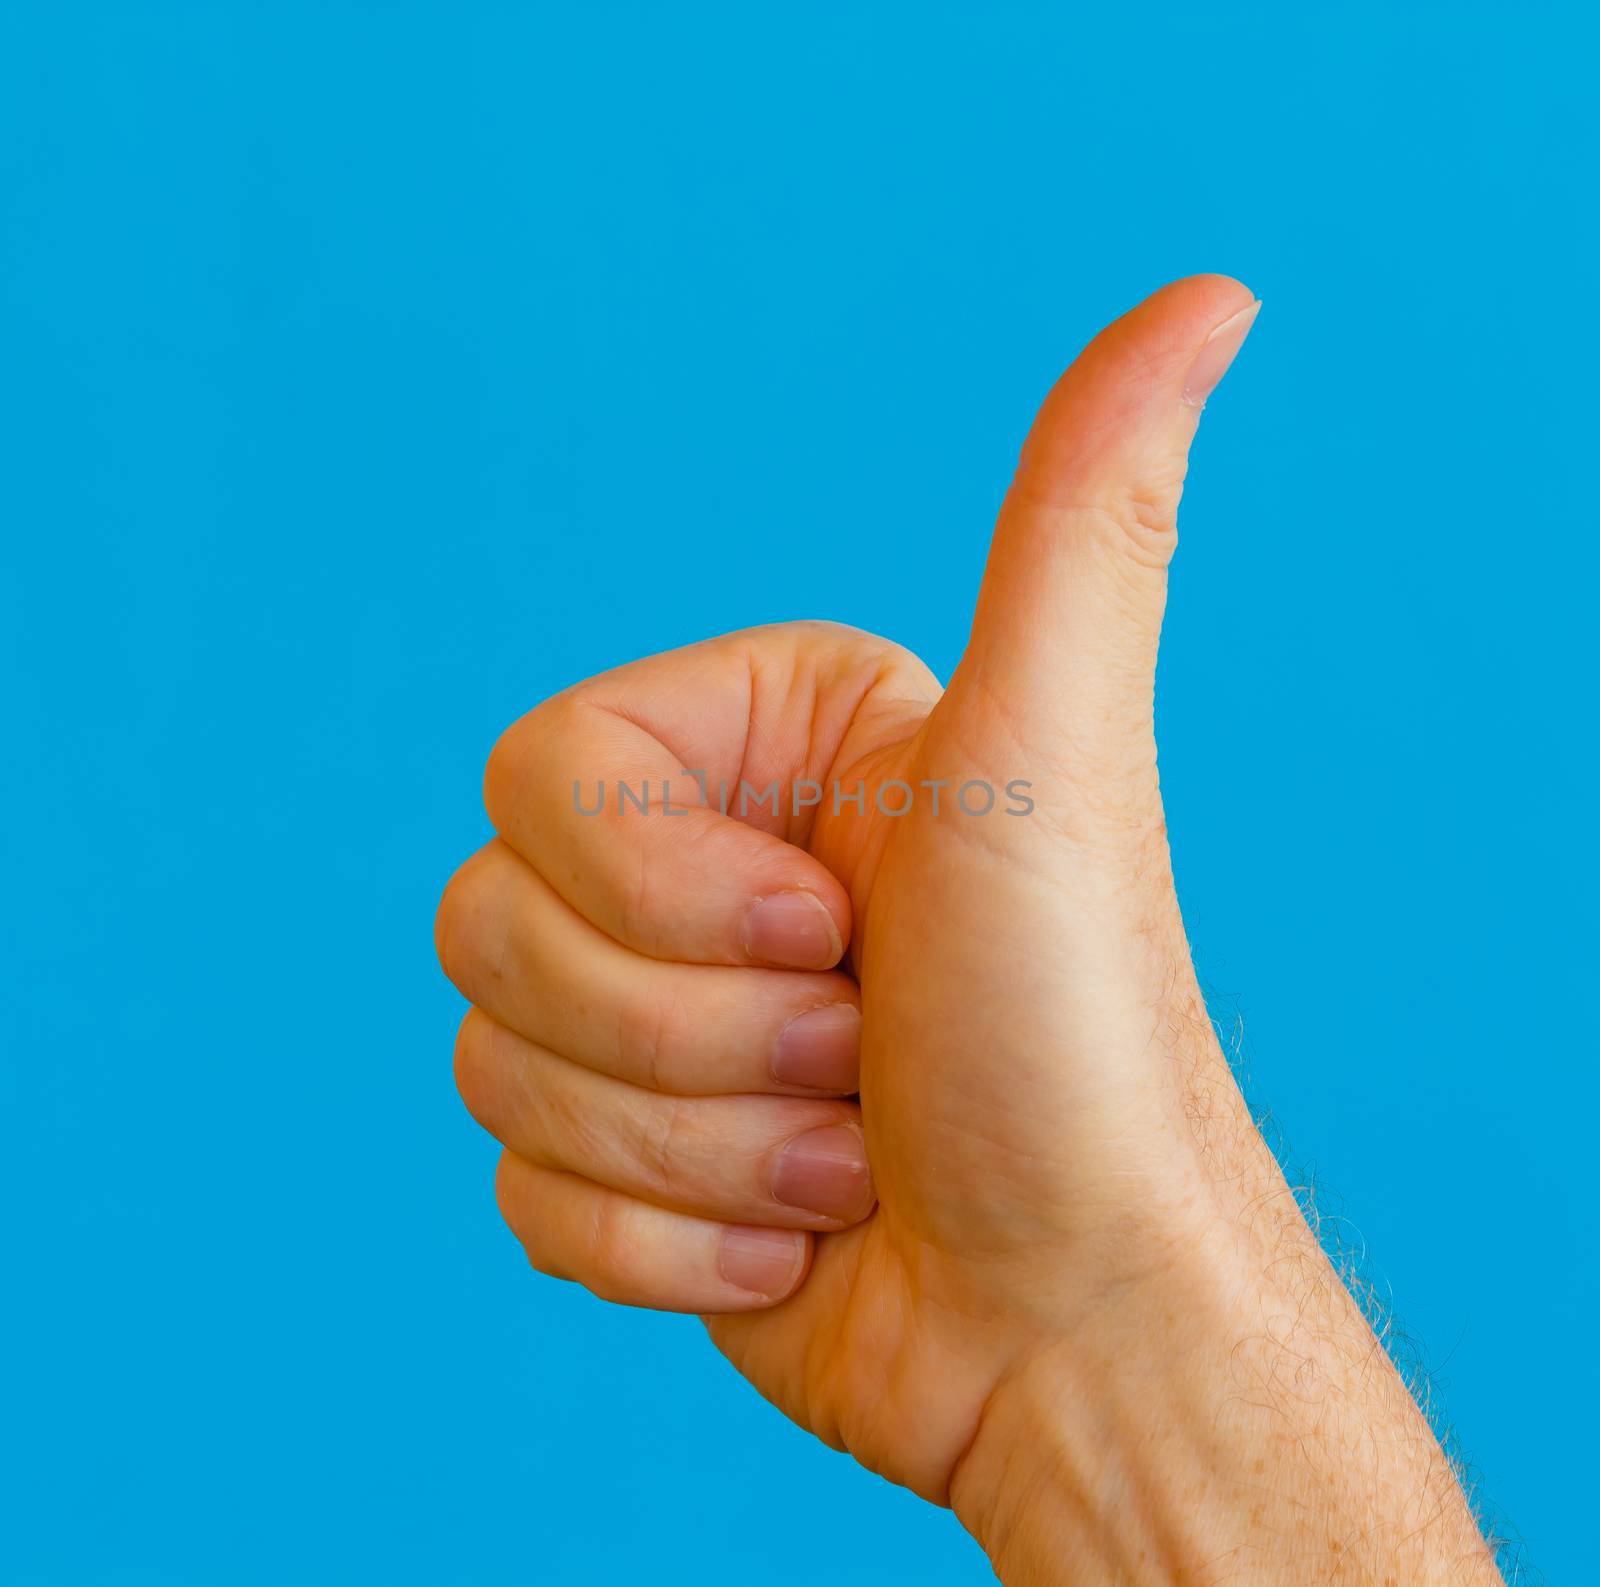 the gesture of the hand of the thumb upwards  to express the meaning of approval